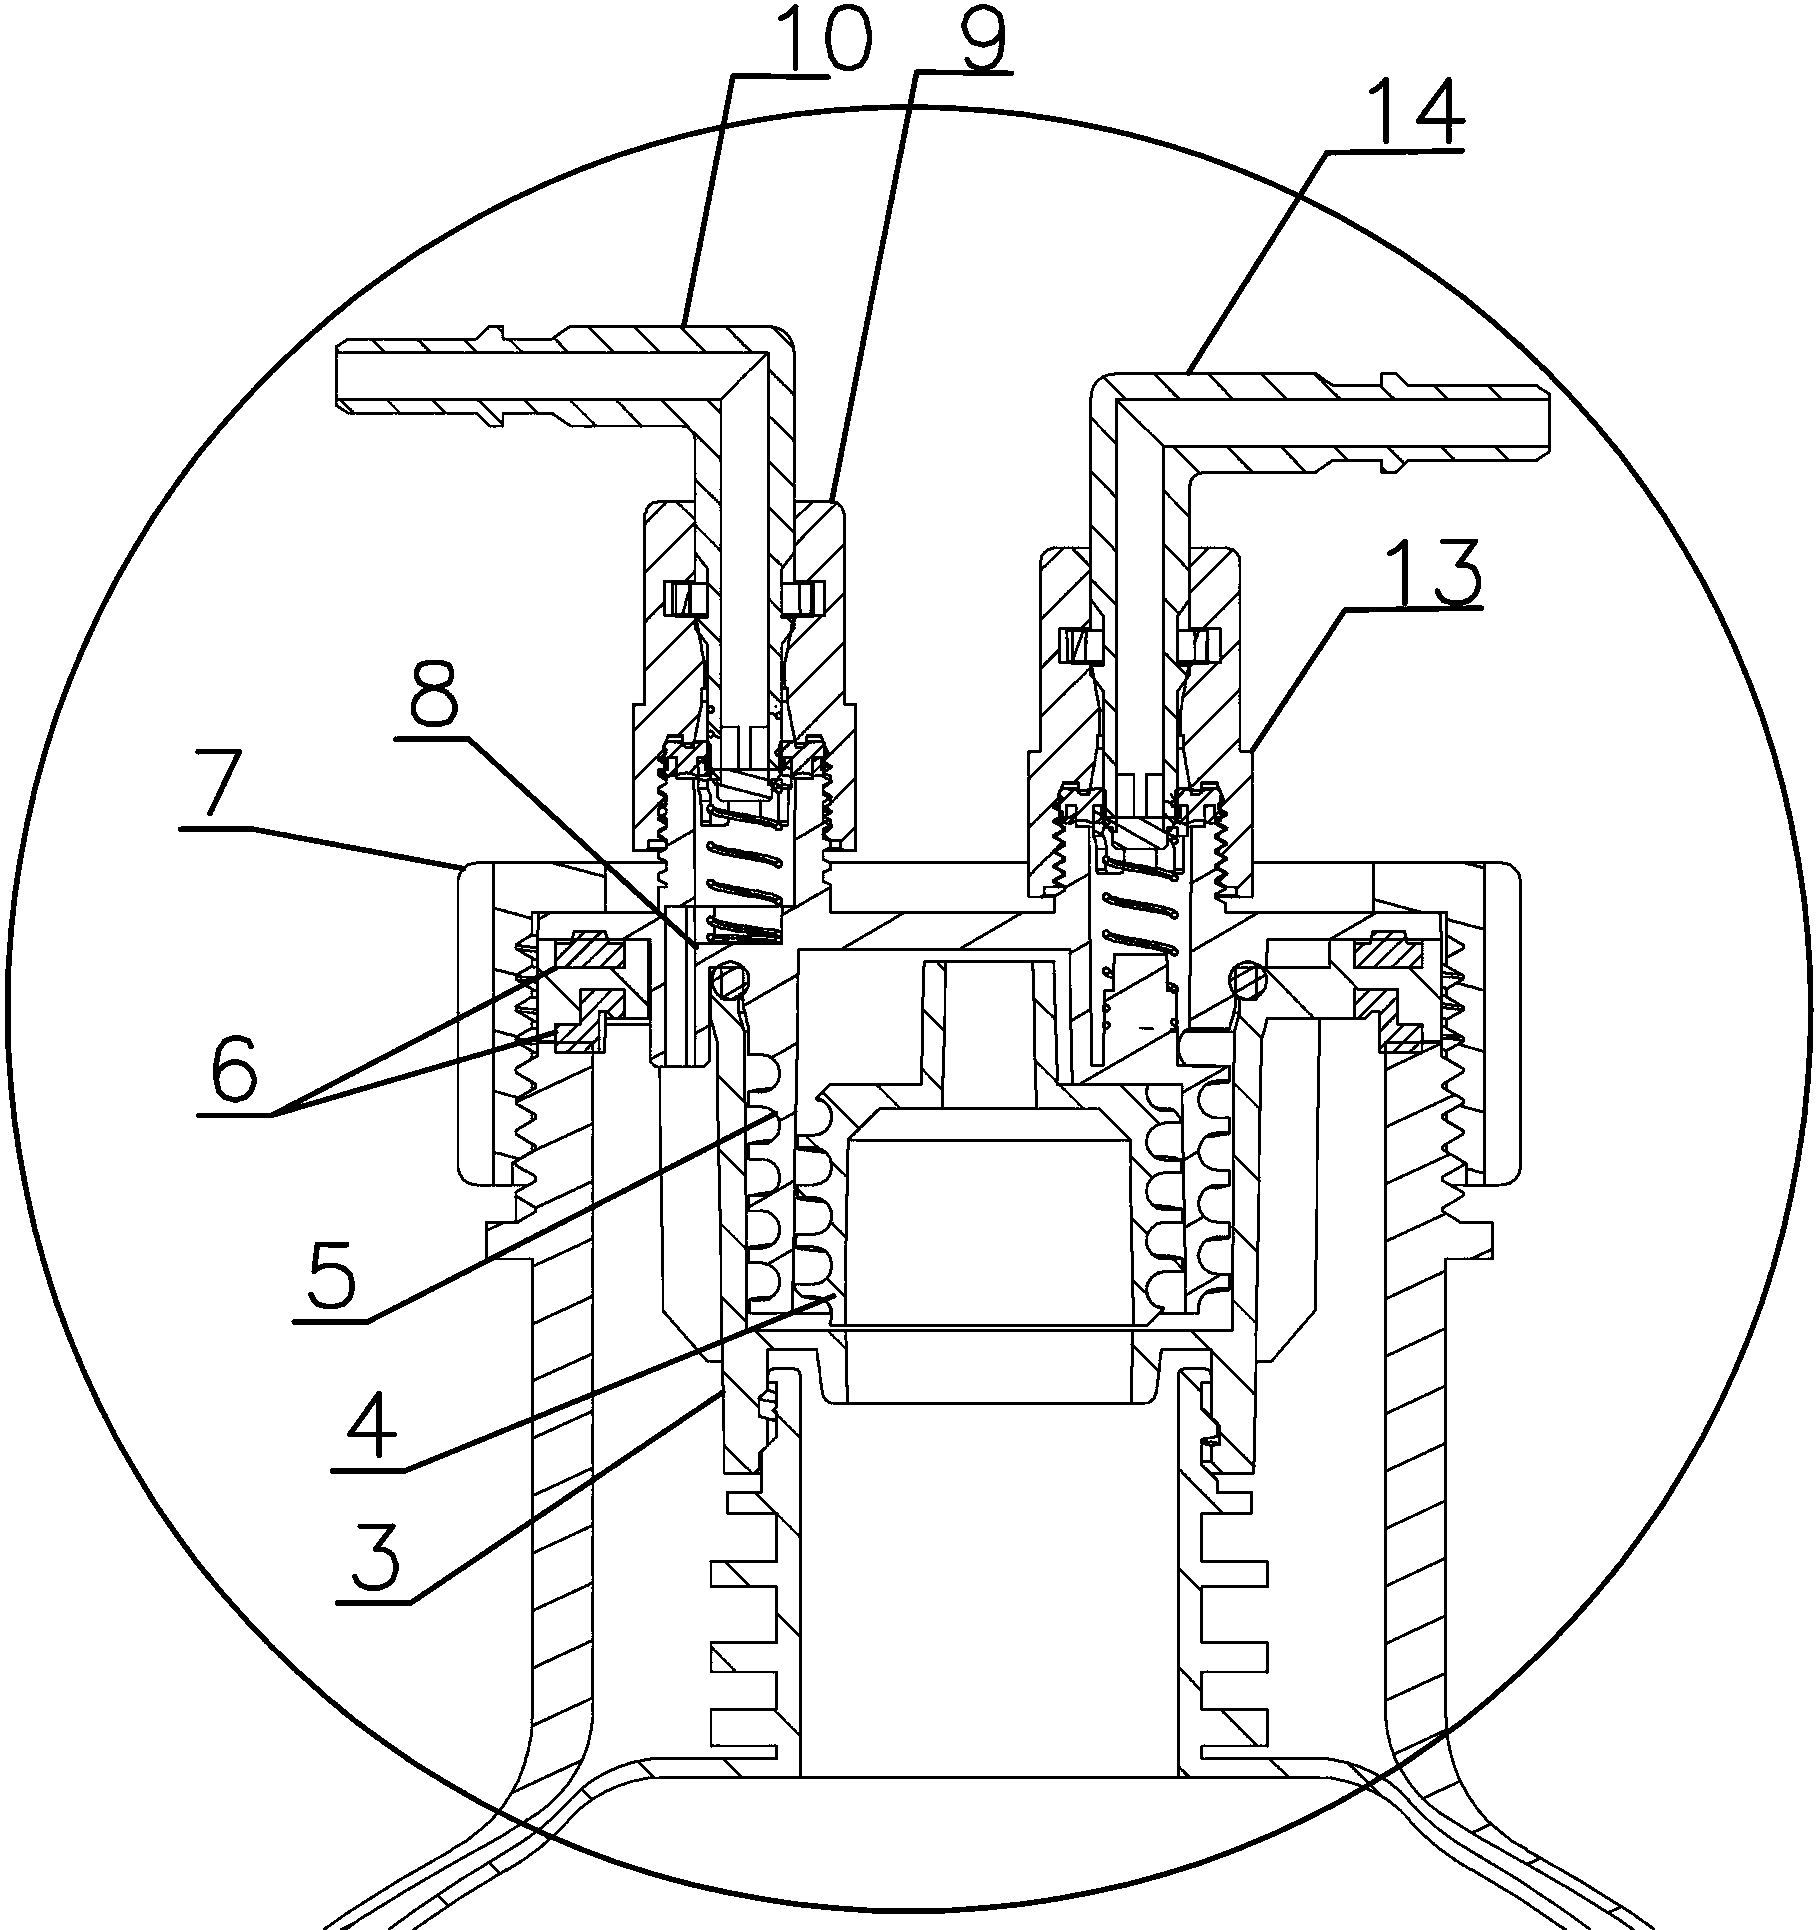 Beer barrel structure provided with valve